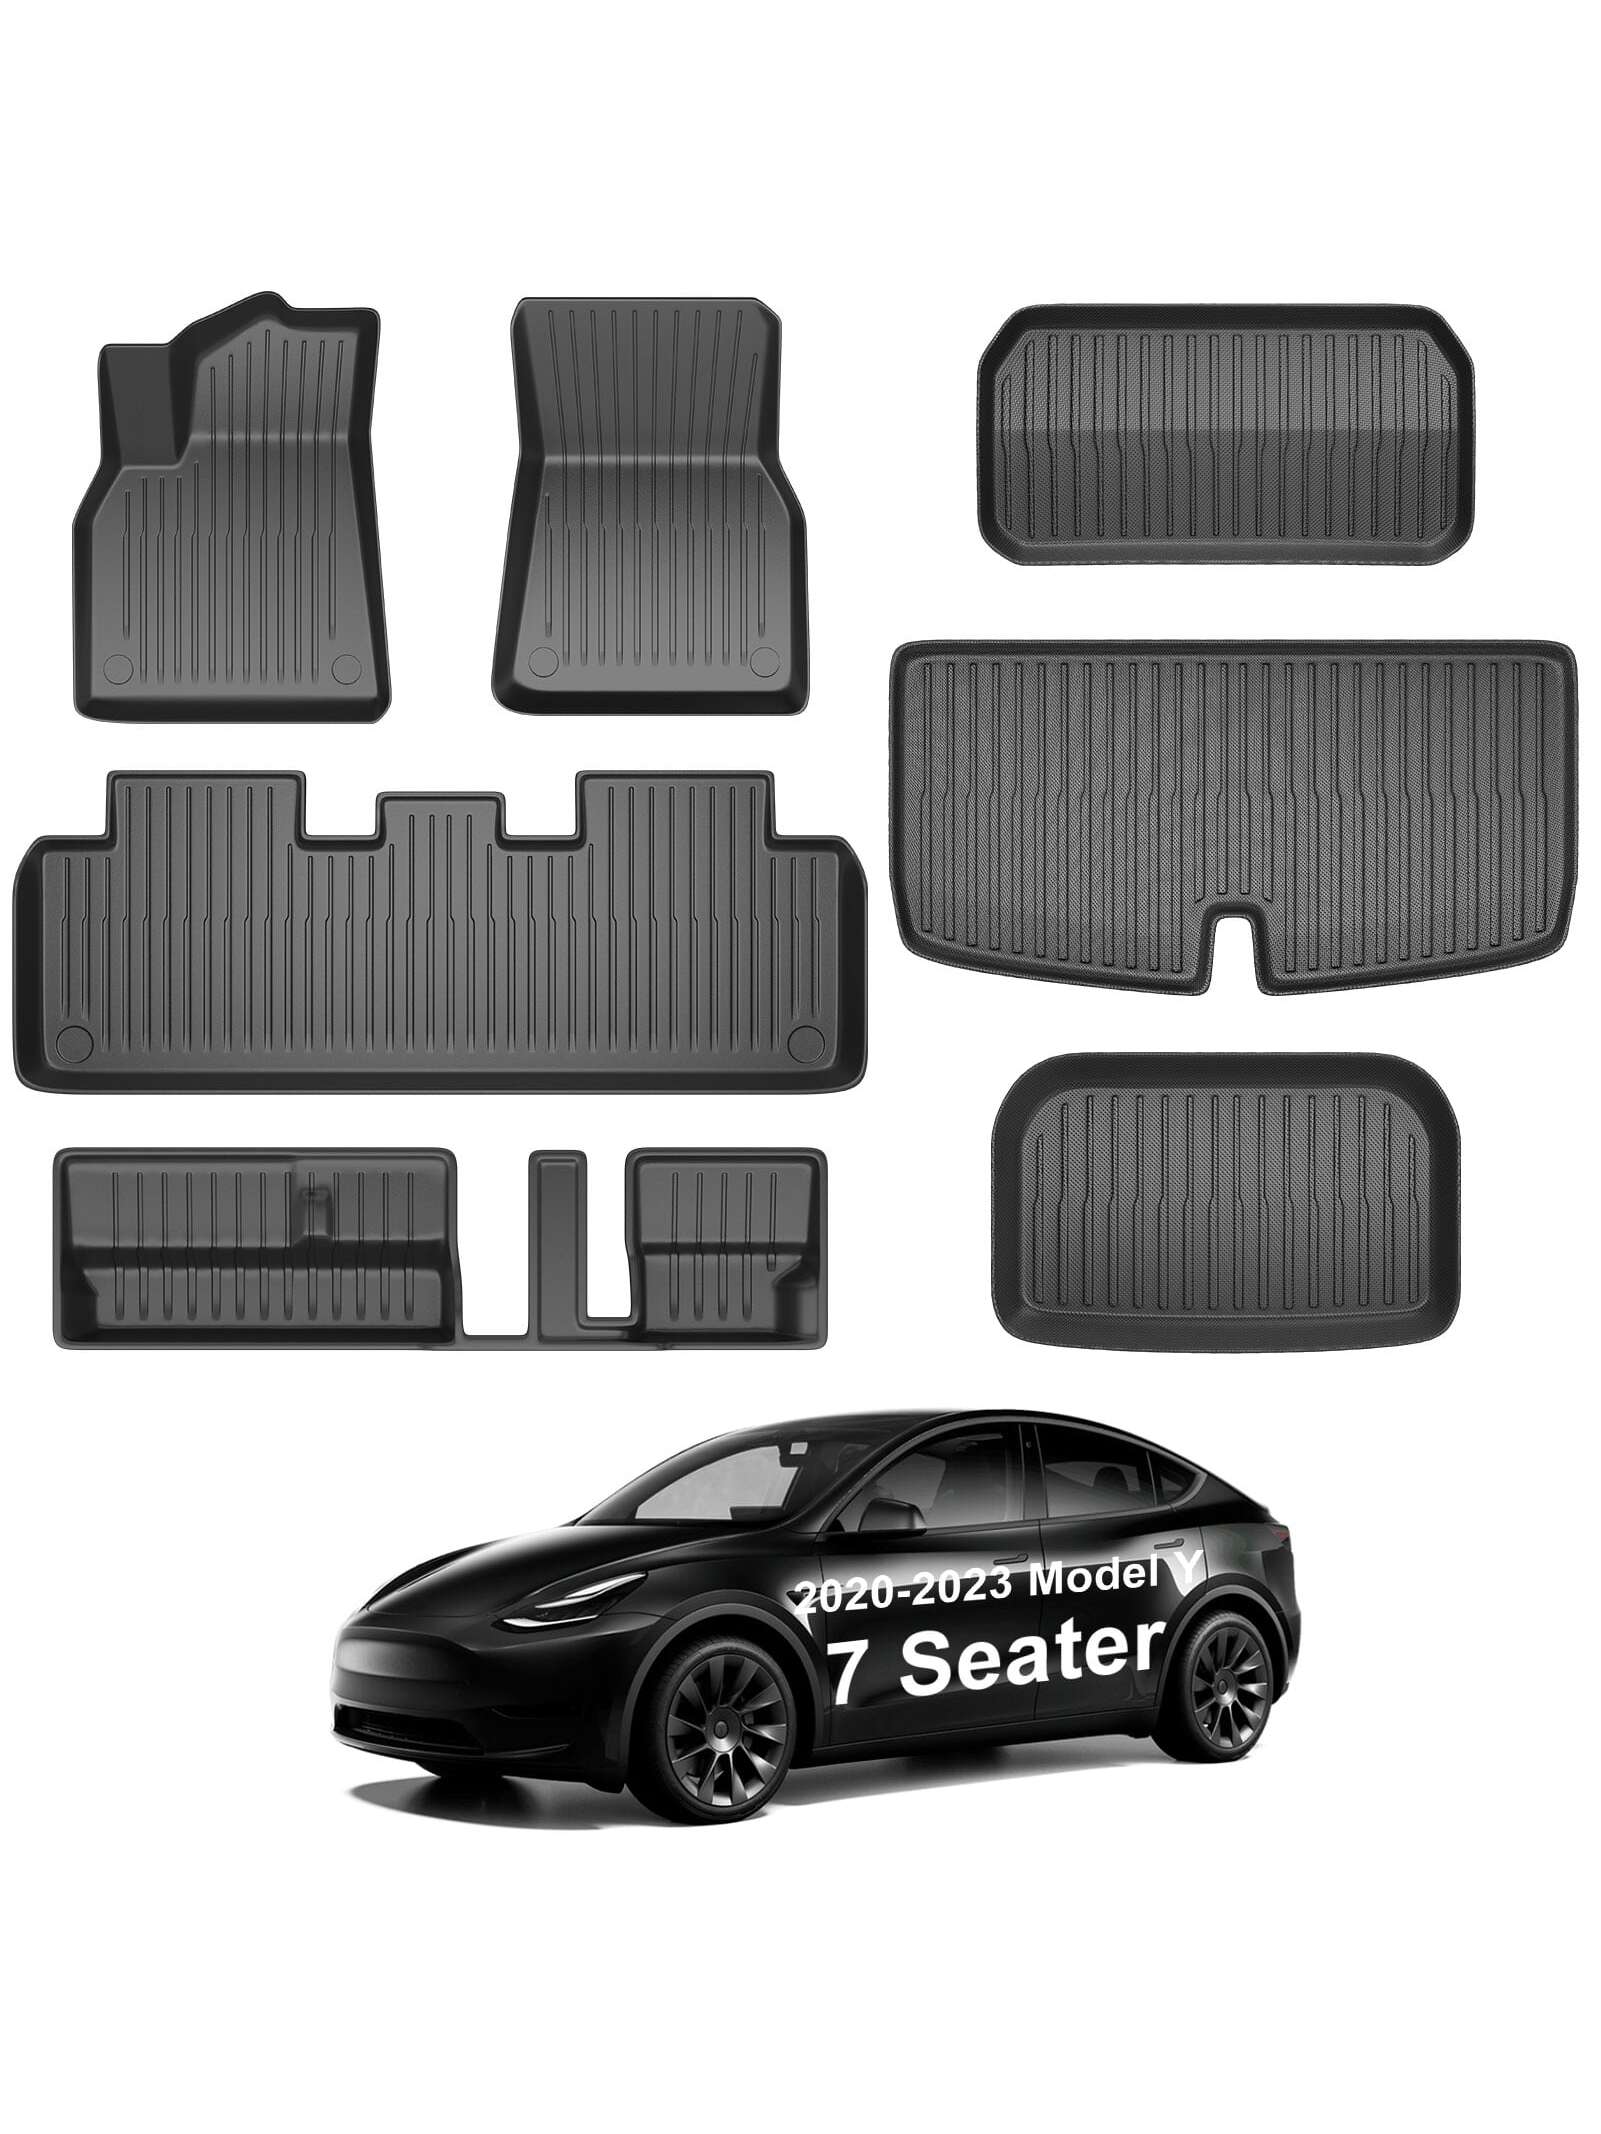 All-Weather Trunk Mats and Cargo Liners for Tesla Model Y 7 Seater (2020-2023) - Waterproof, Non-Slip Full Set Floor Liners (7PCS)